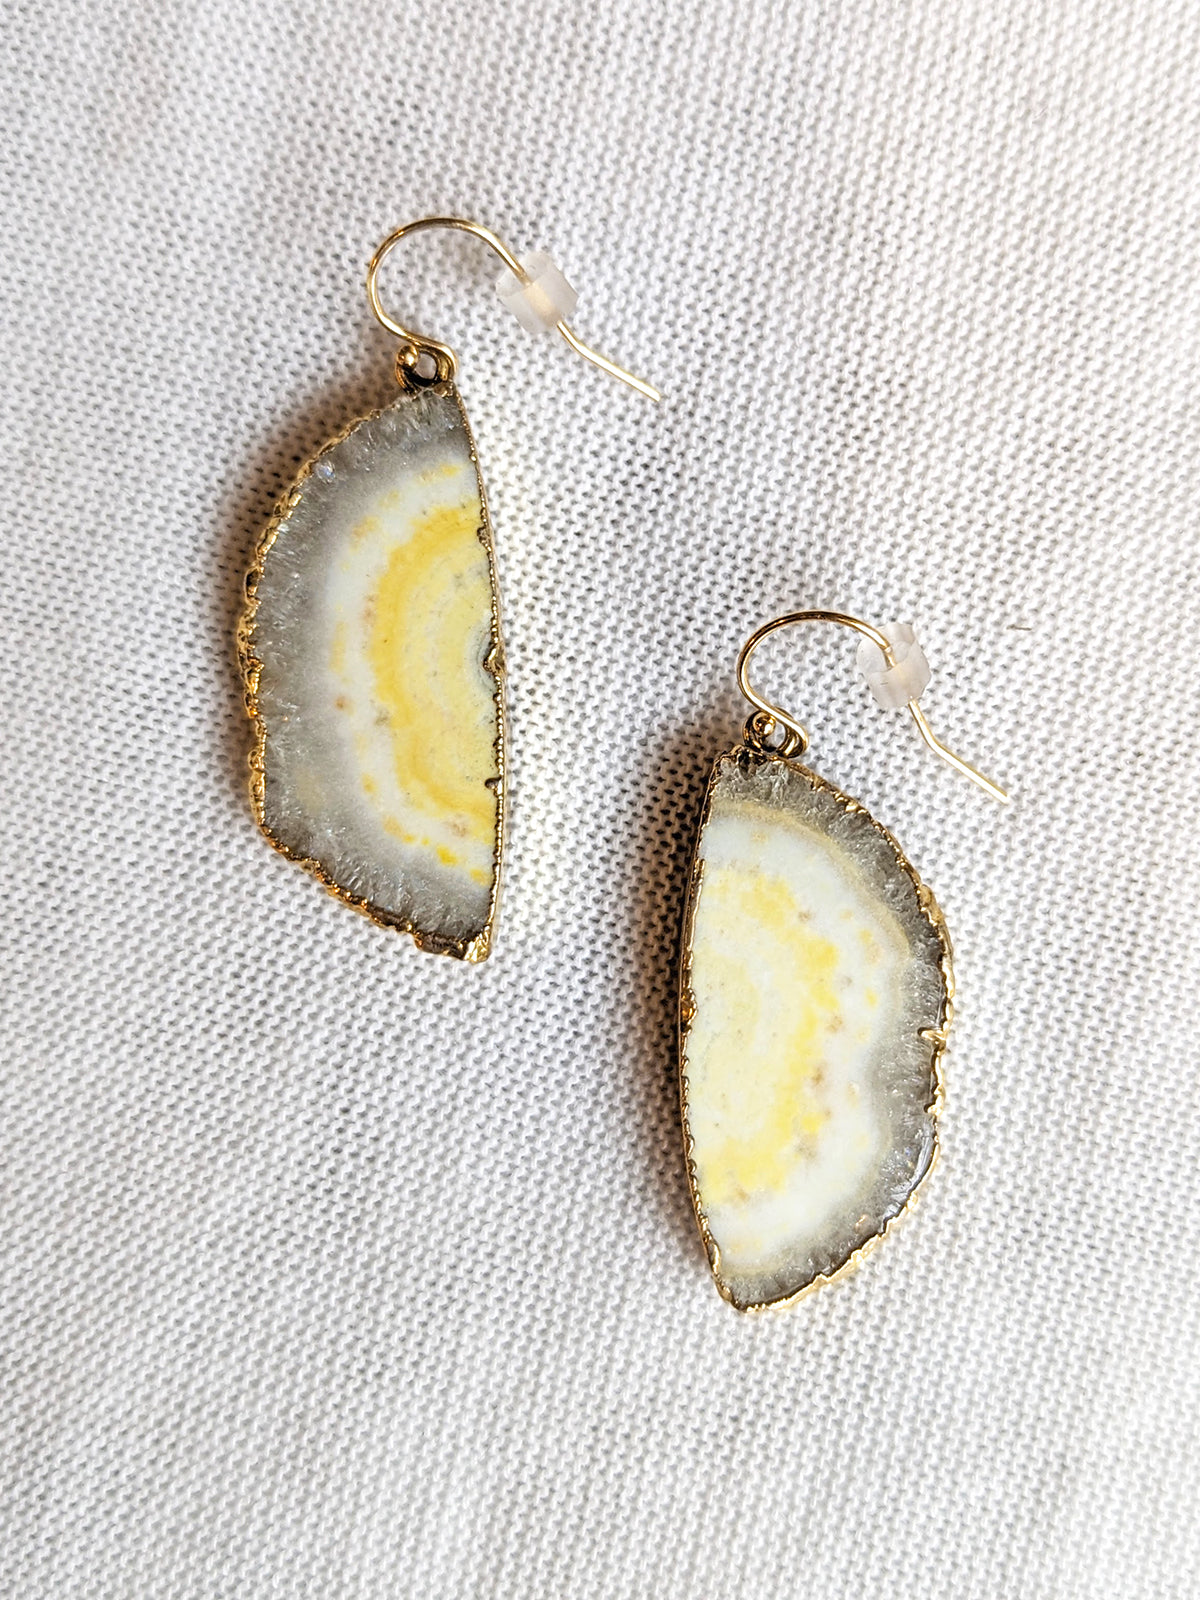 Nuance Yellow Geode Earrings | One of a Kind